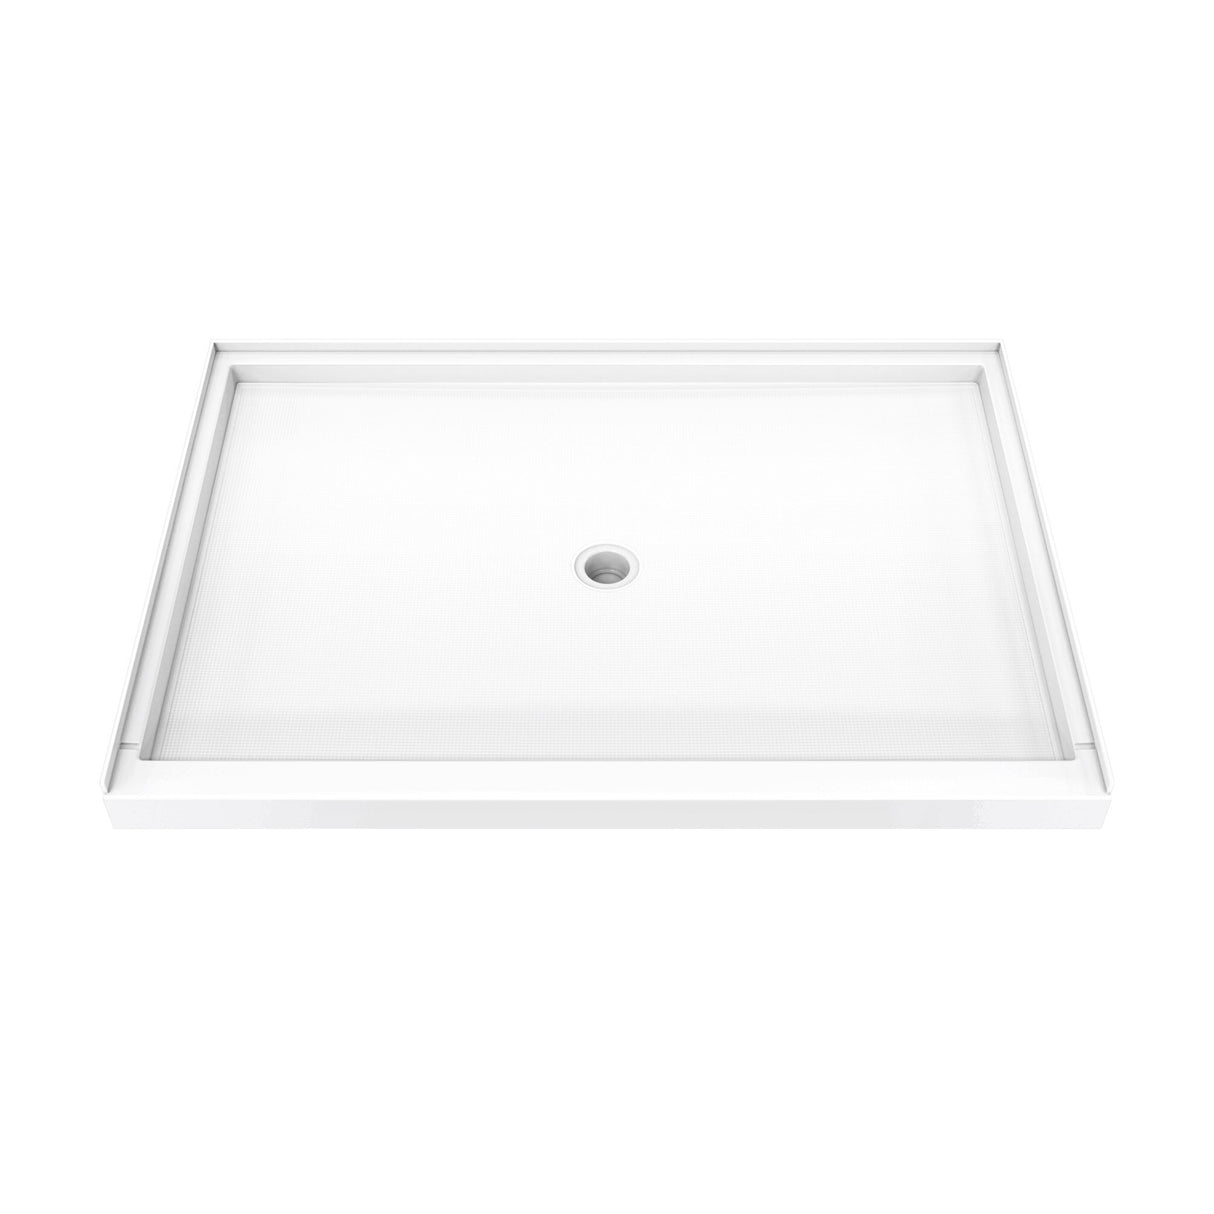 DreamLine DreamStone 42 in. D x 60 in. W Base and Wall Kit in White Traditional Subway Pattern